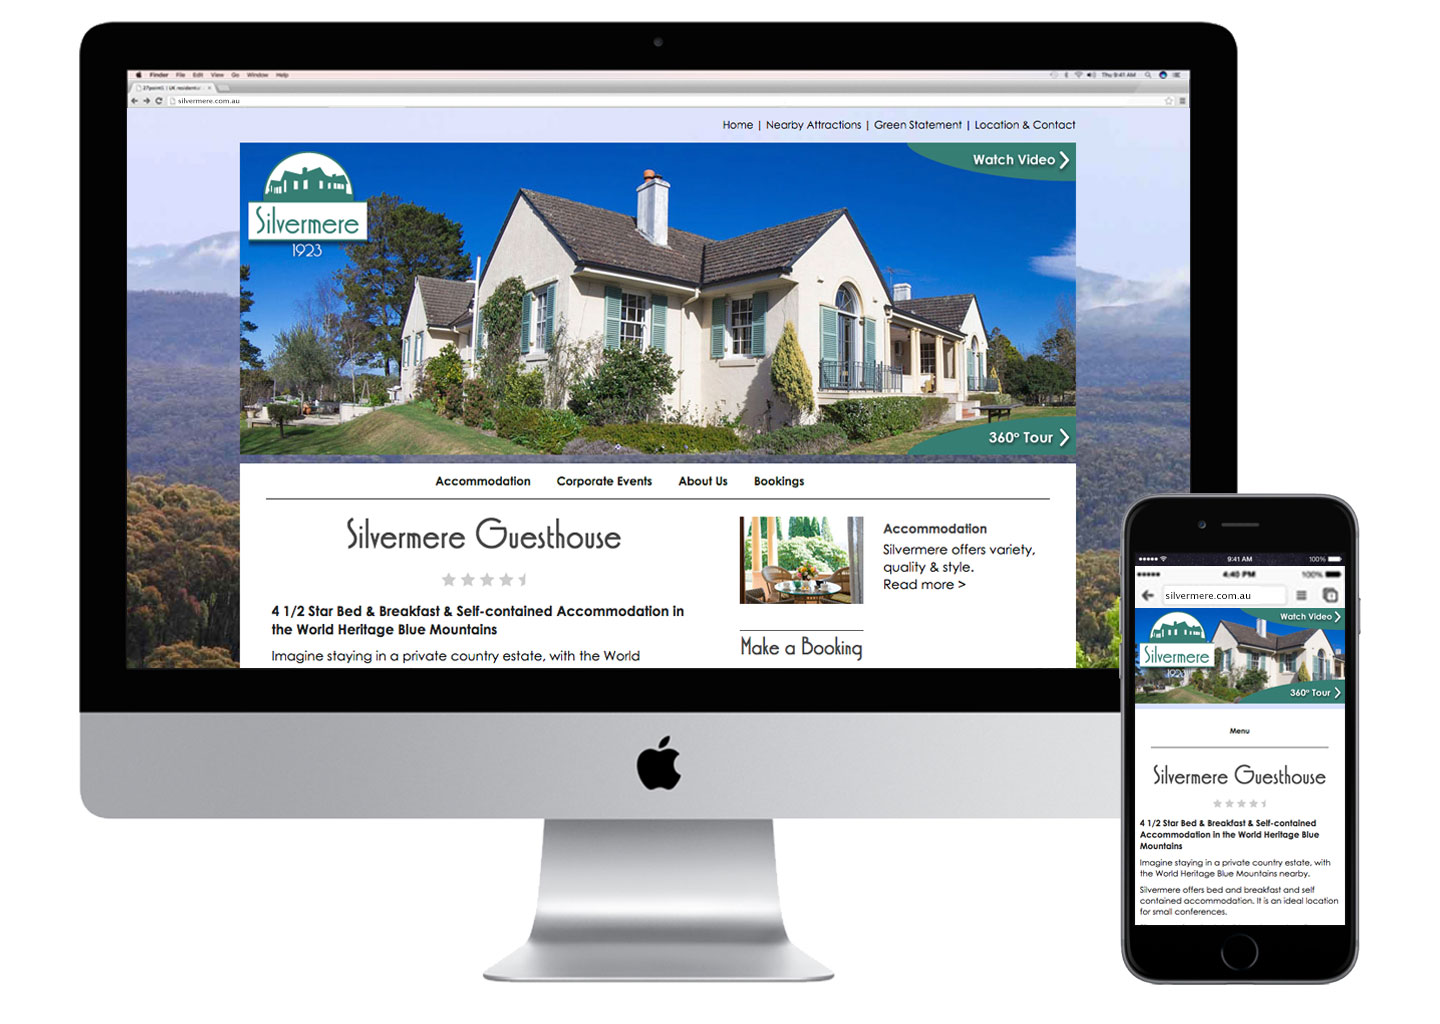 Silvermere Guesthouse website